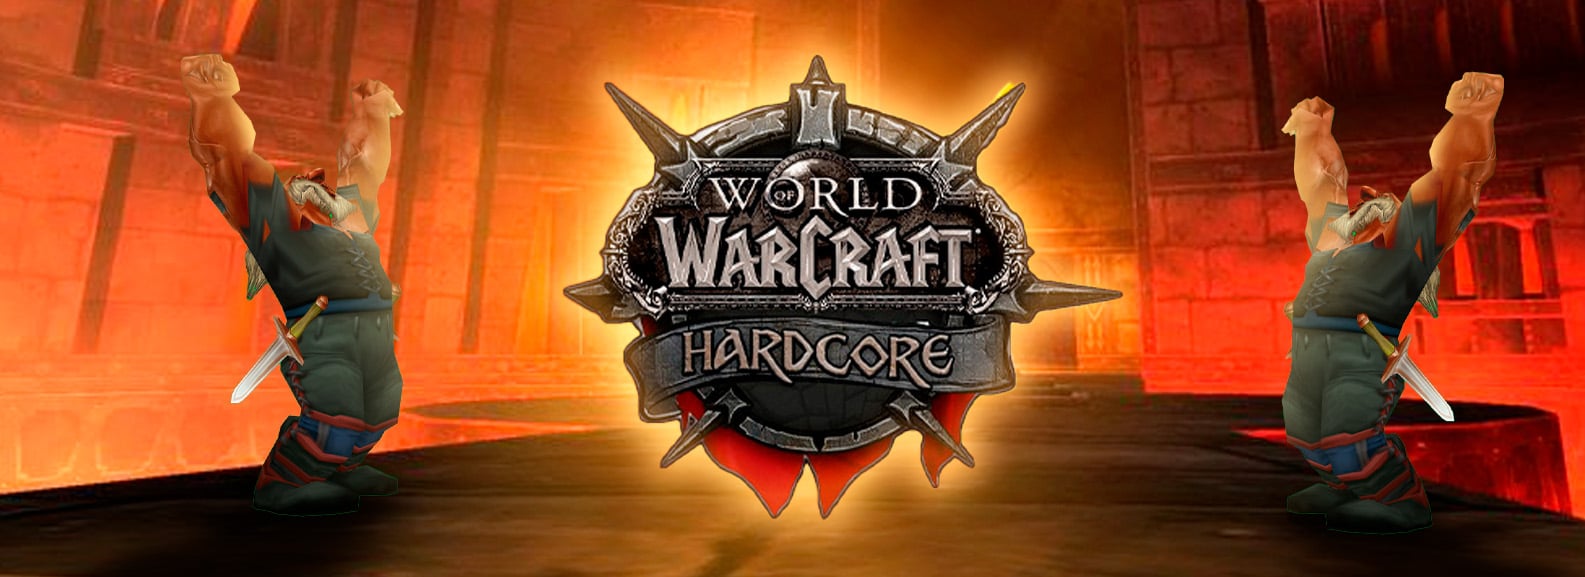 How to Join Wow Classic Hardcore PTR?